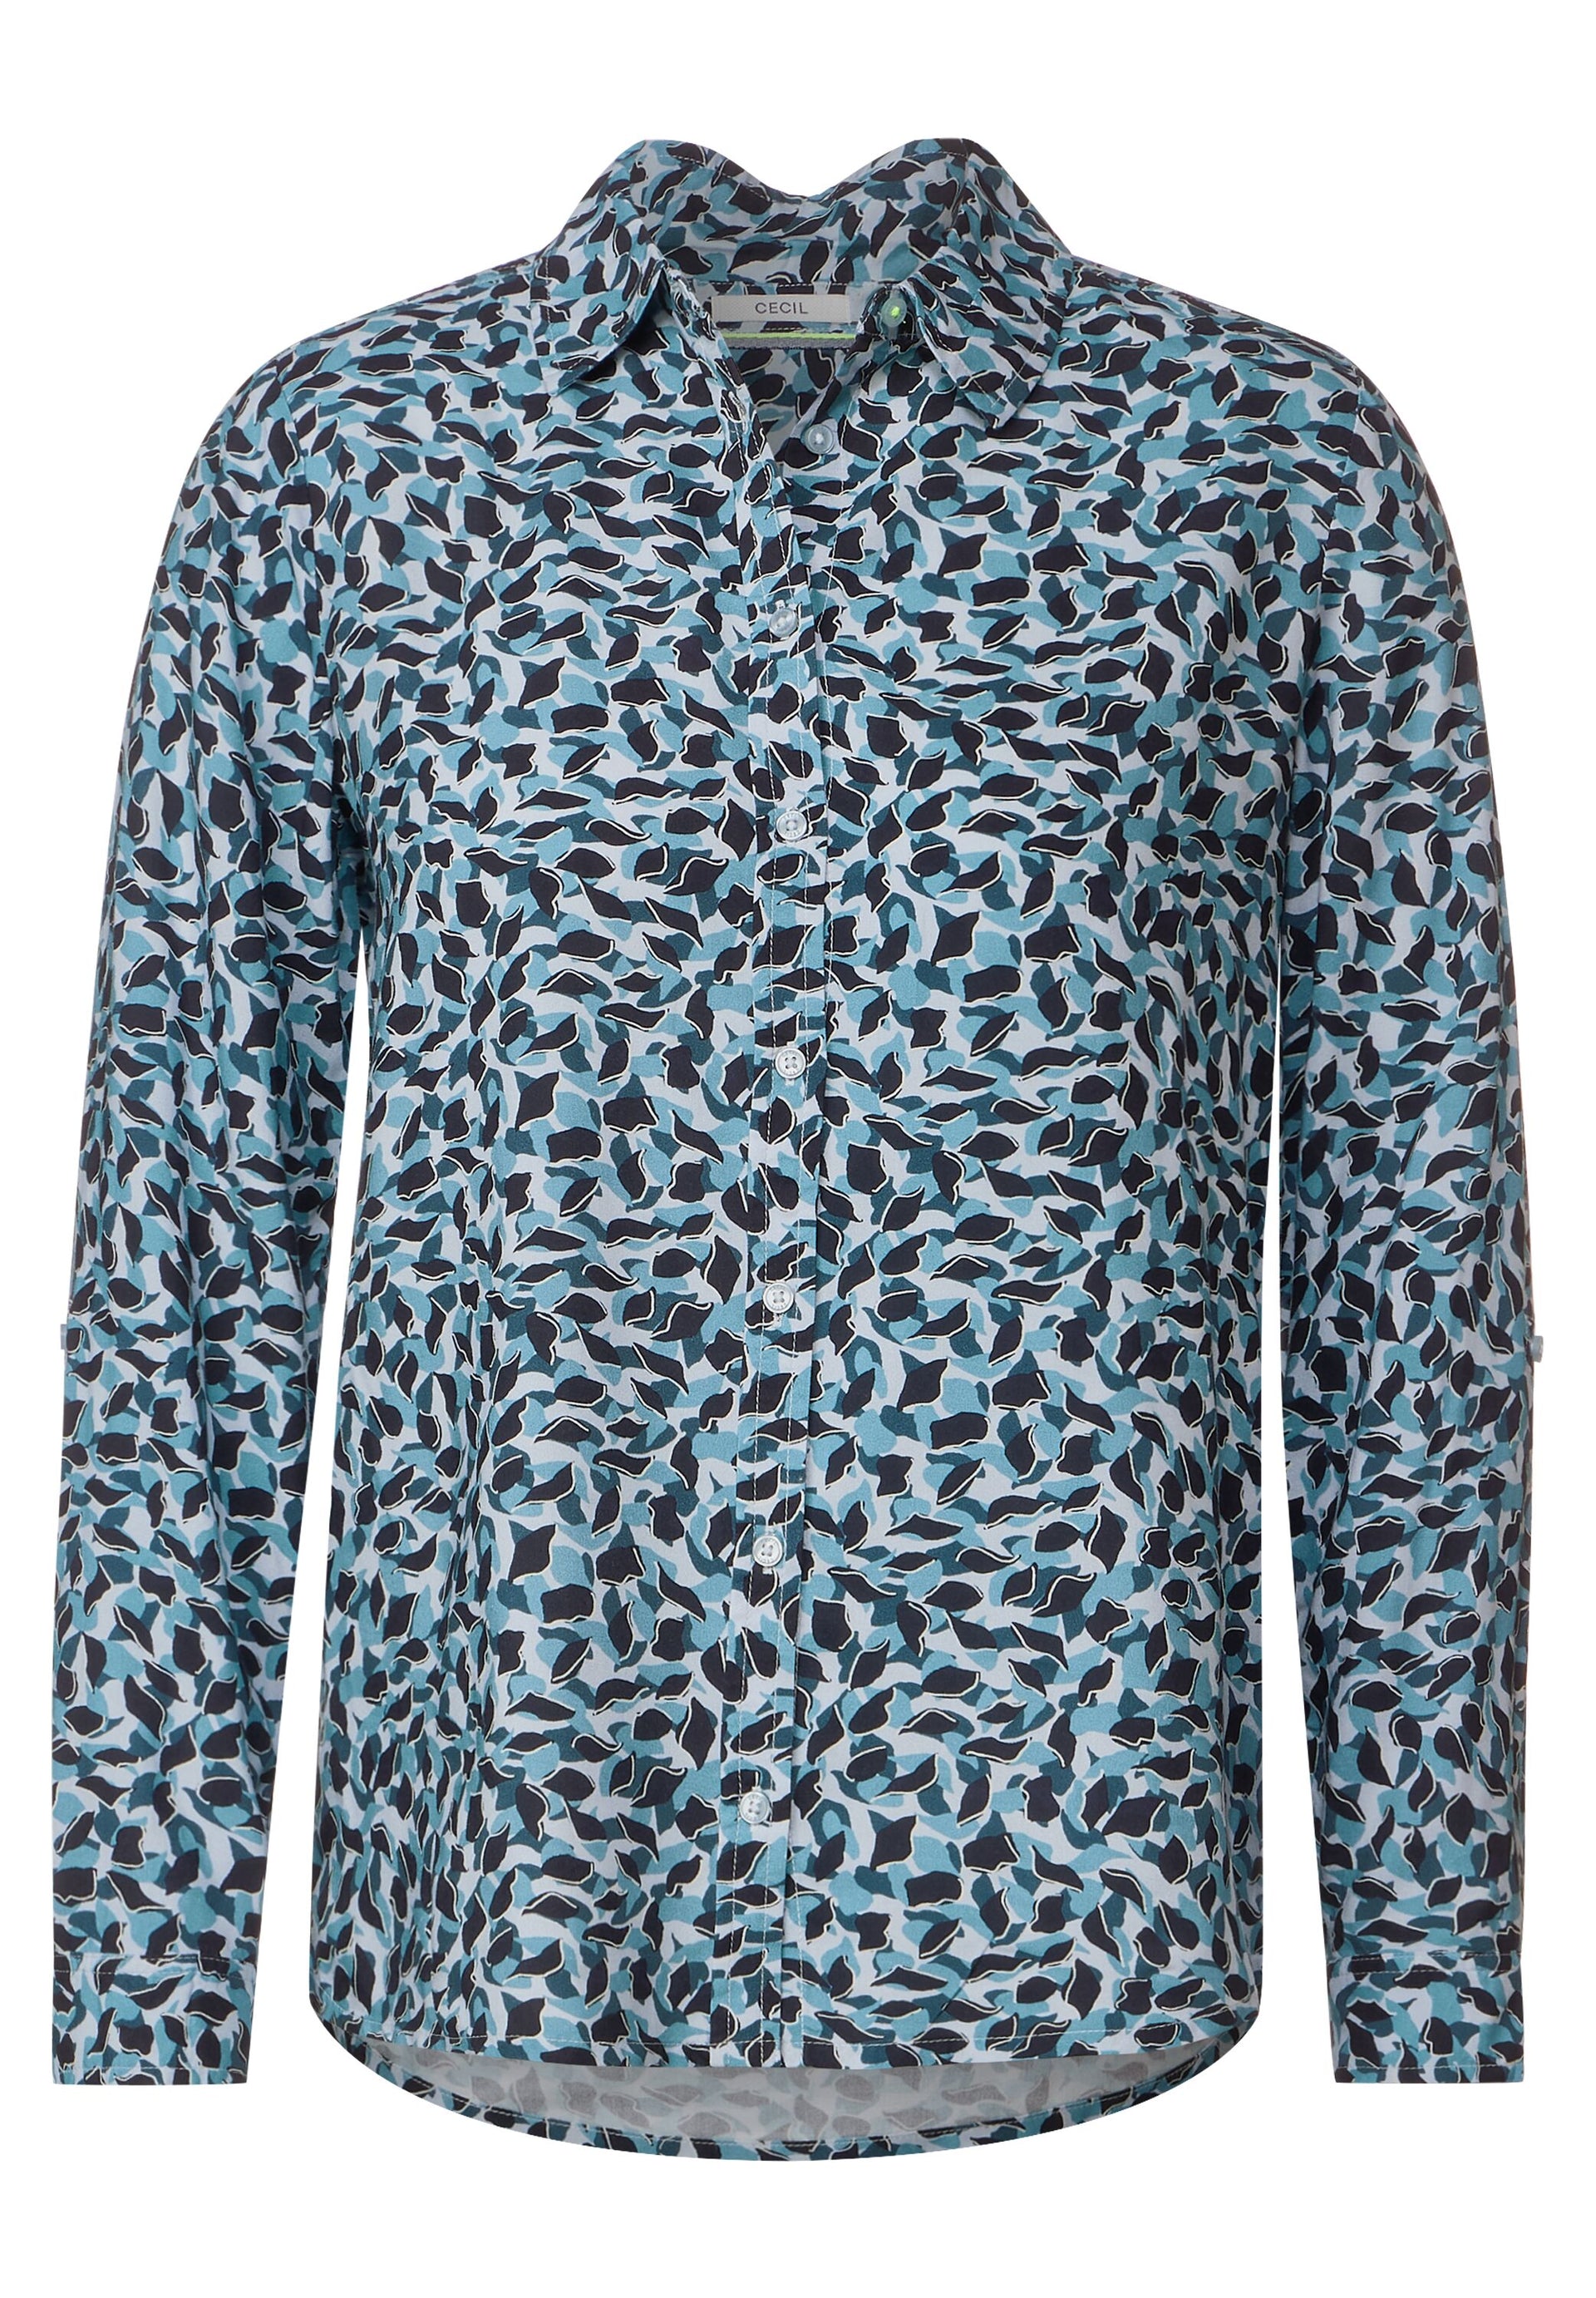 CECIL - Bluse mit grafischem Print - Farbe: strong petrol blue – TWISTY Mode